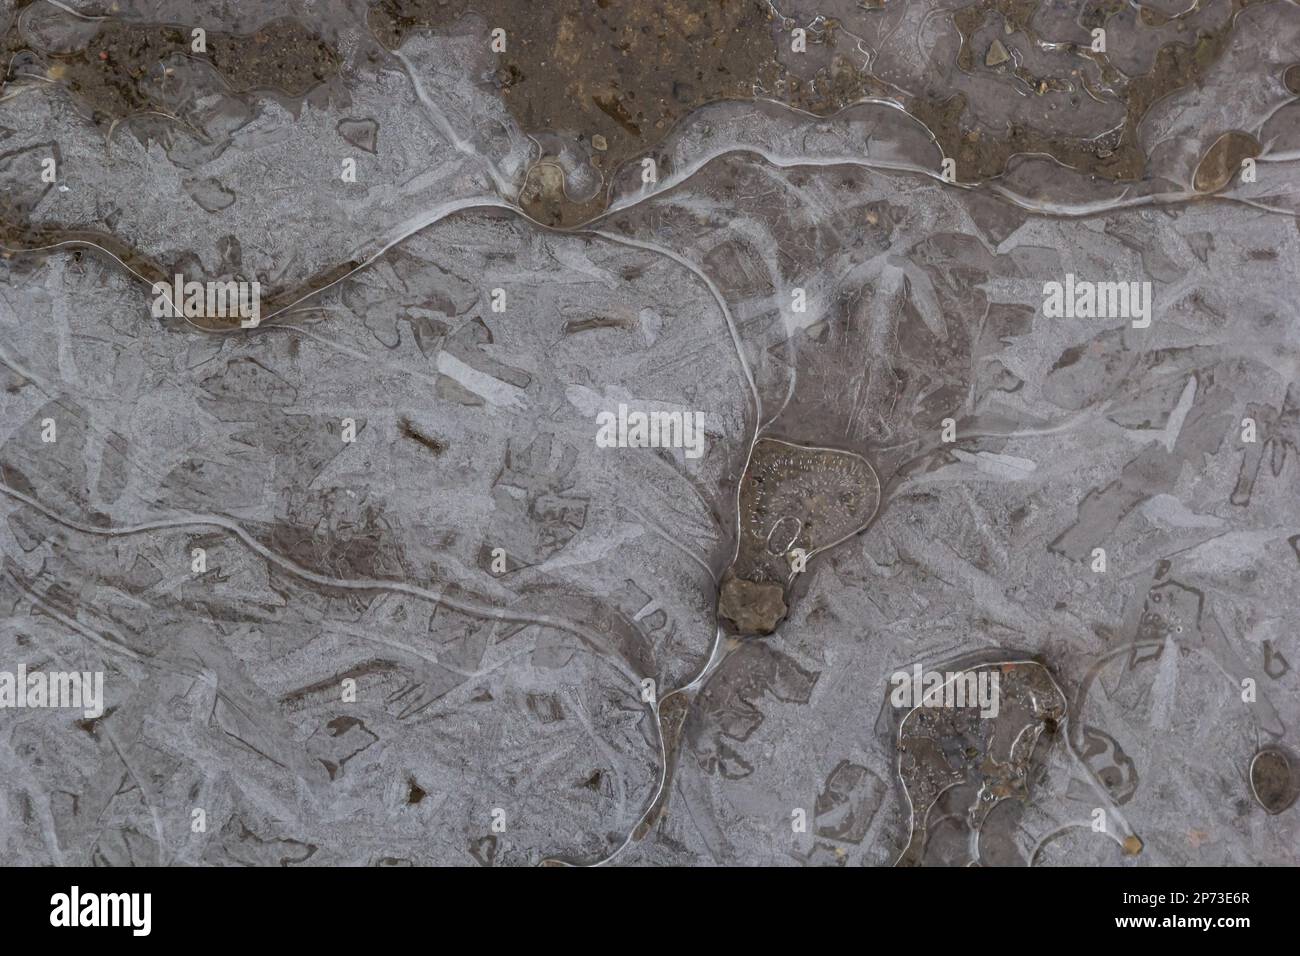 beautifully frozen water in a puddle. air bubbles inside the ice. frozen mud. Stock Photo